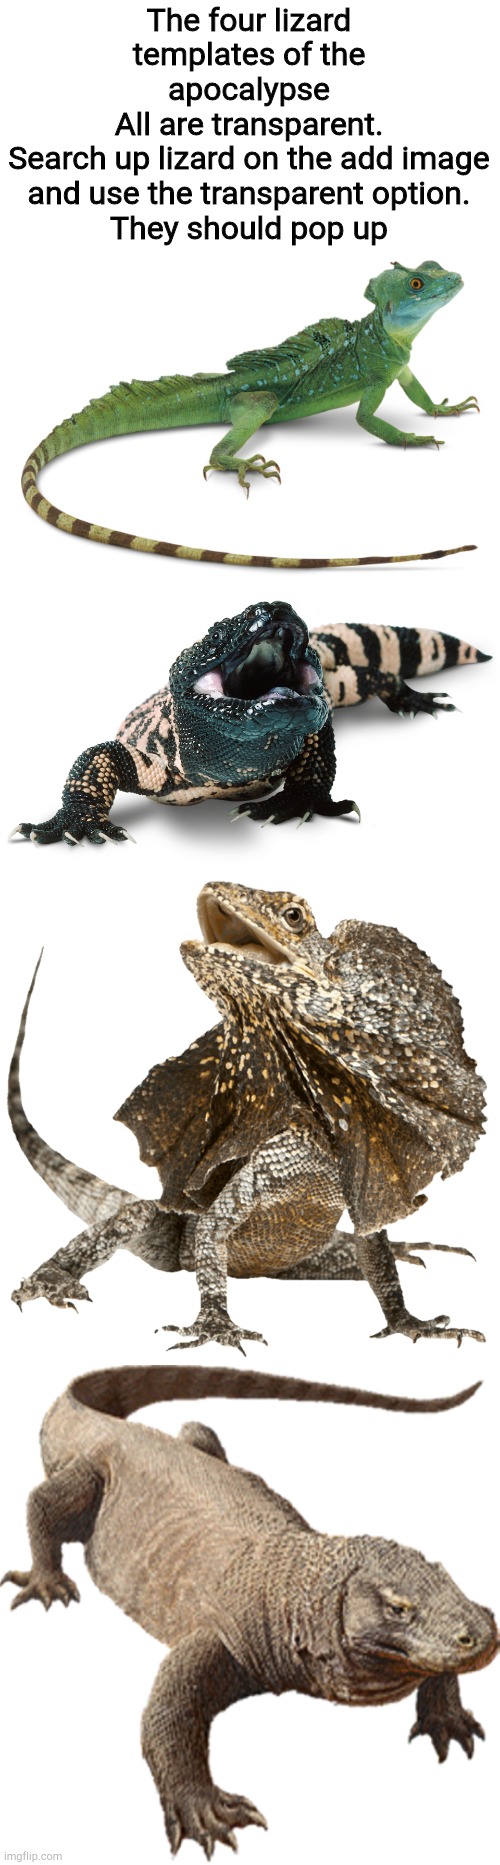 Or search the image tags | The four lizard templates of the apocalypse
All are transparent.
Search up lizard on the add image and use the transparent option.
They should pop up | image tagged in gila monster,frilled lizard,komodo dragon,basilisk,can i be mod | made w/ Imgflip meme maker